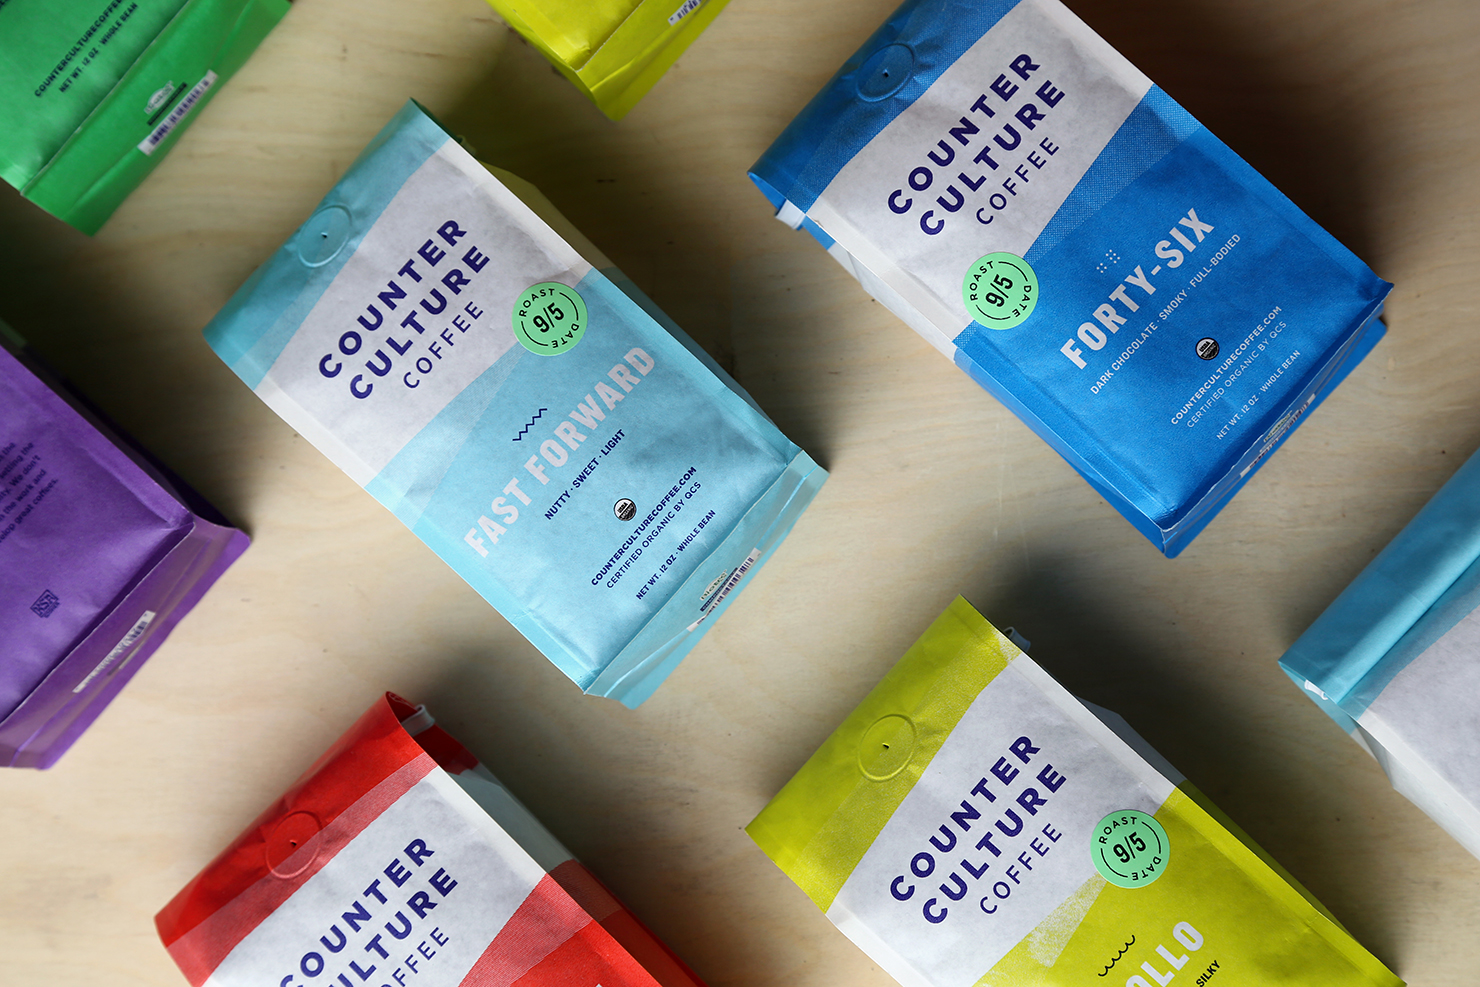 https://sprudge.com/wp-content/uploads/2014/09/Counter-Culture-Coffee-New-Bags-05.jpg